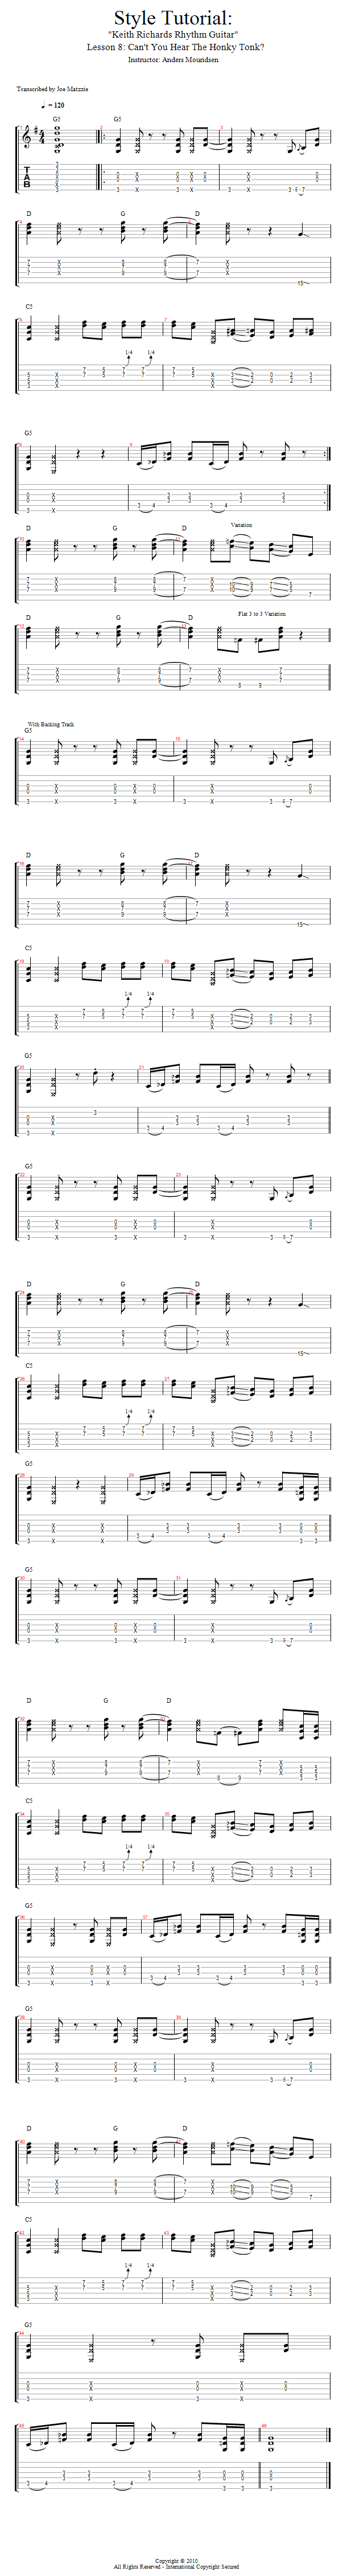 Can't You Hear The Honky Tonk? song notation